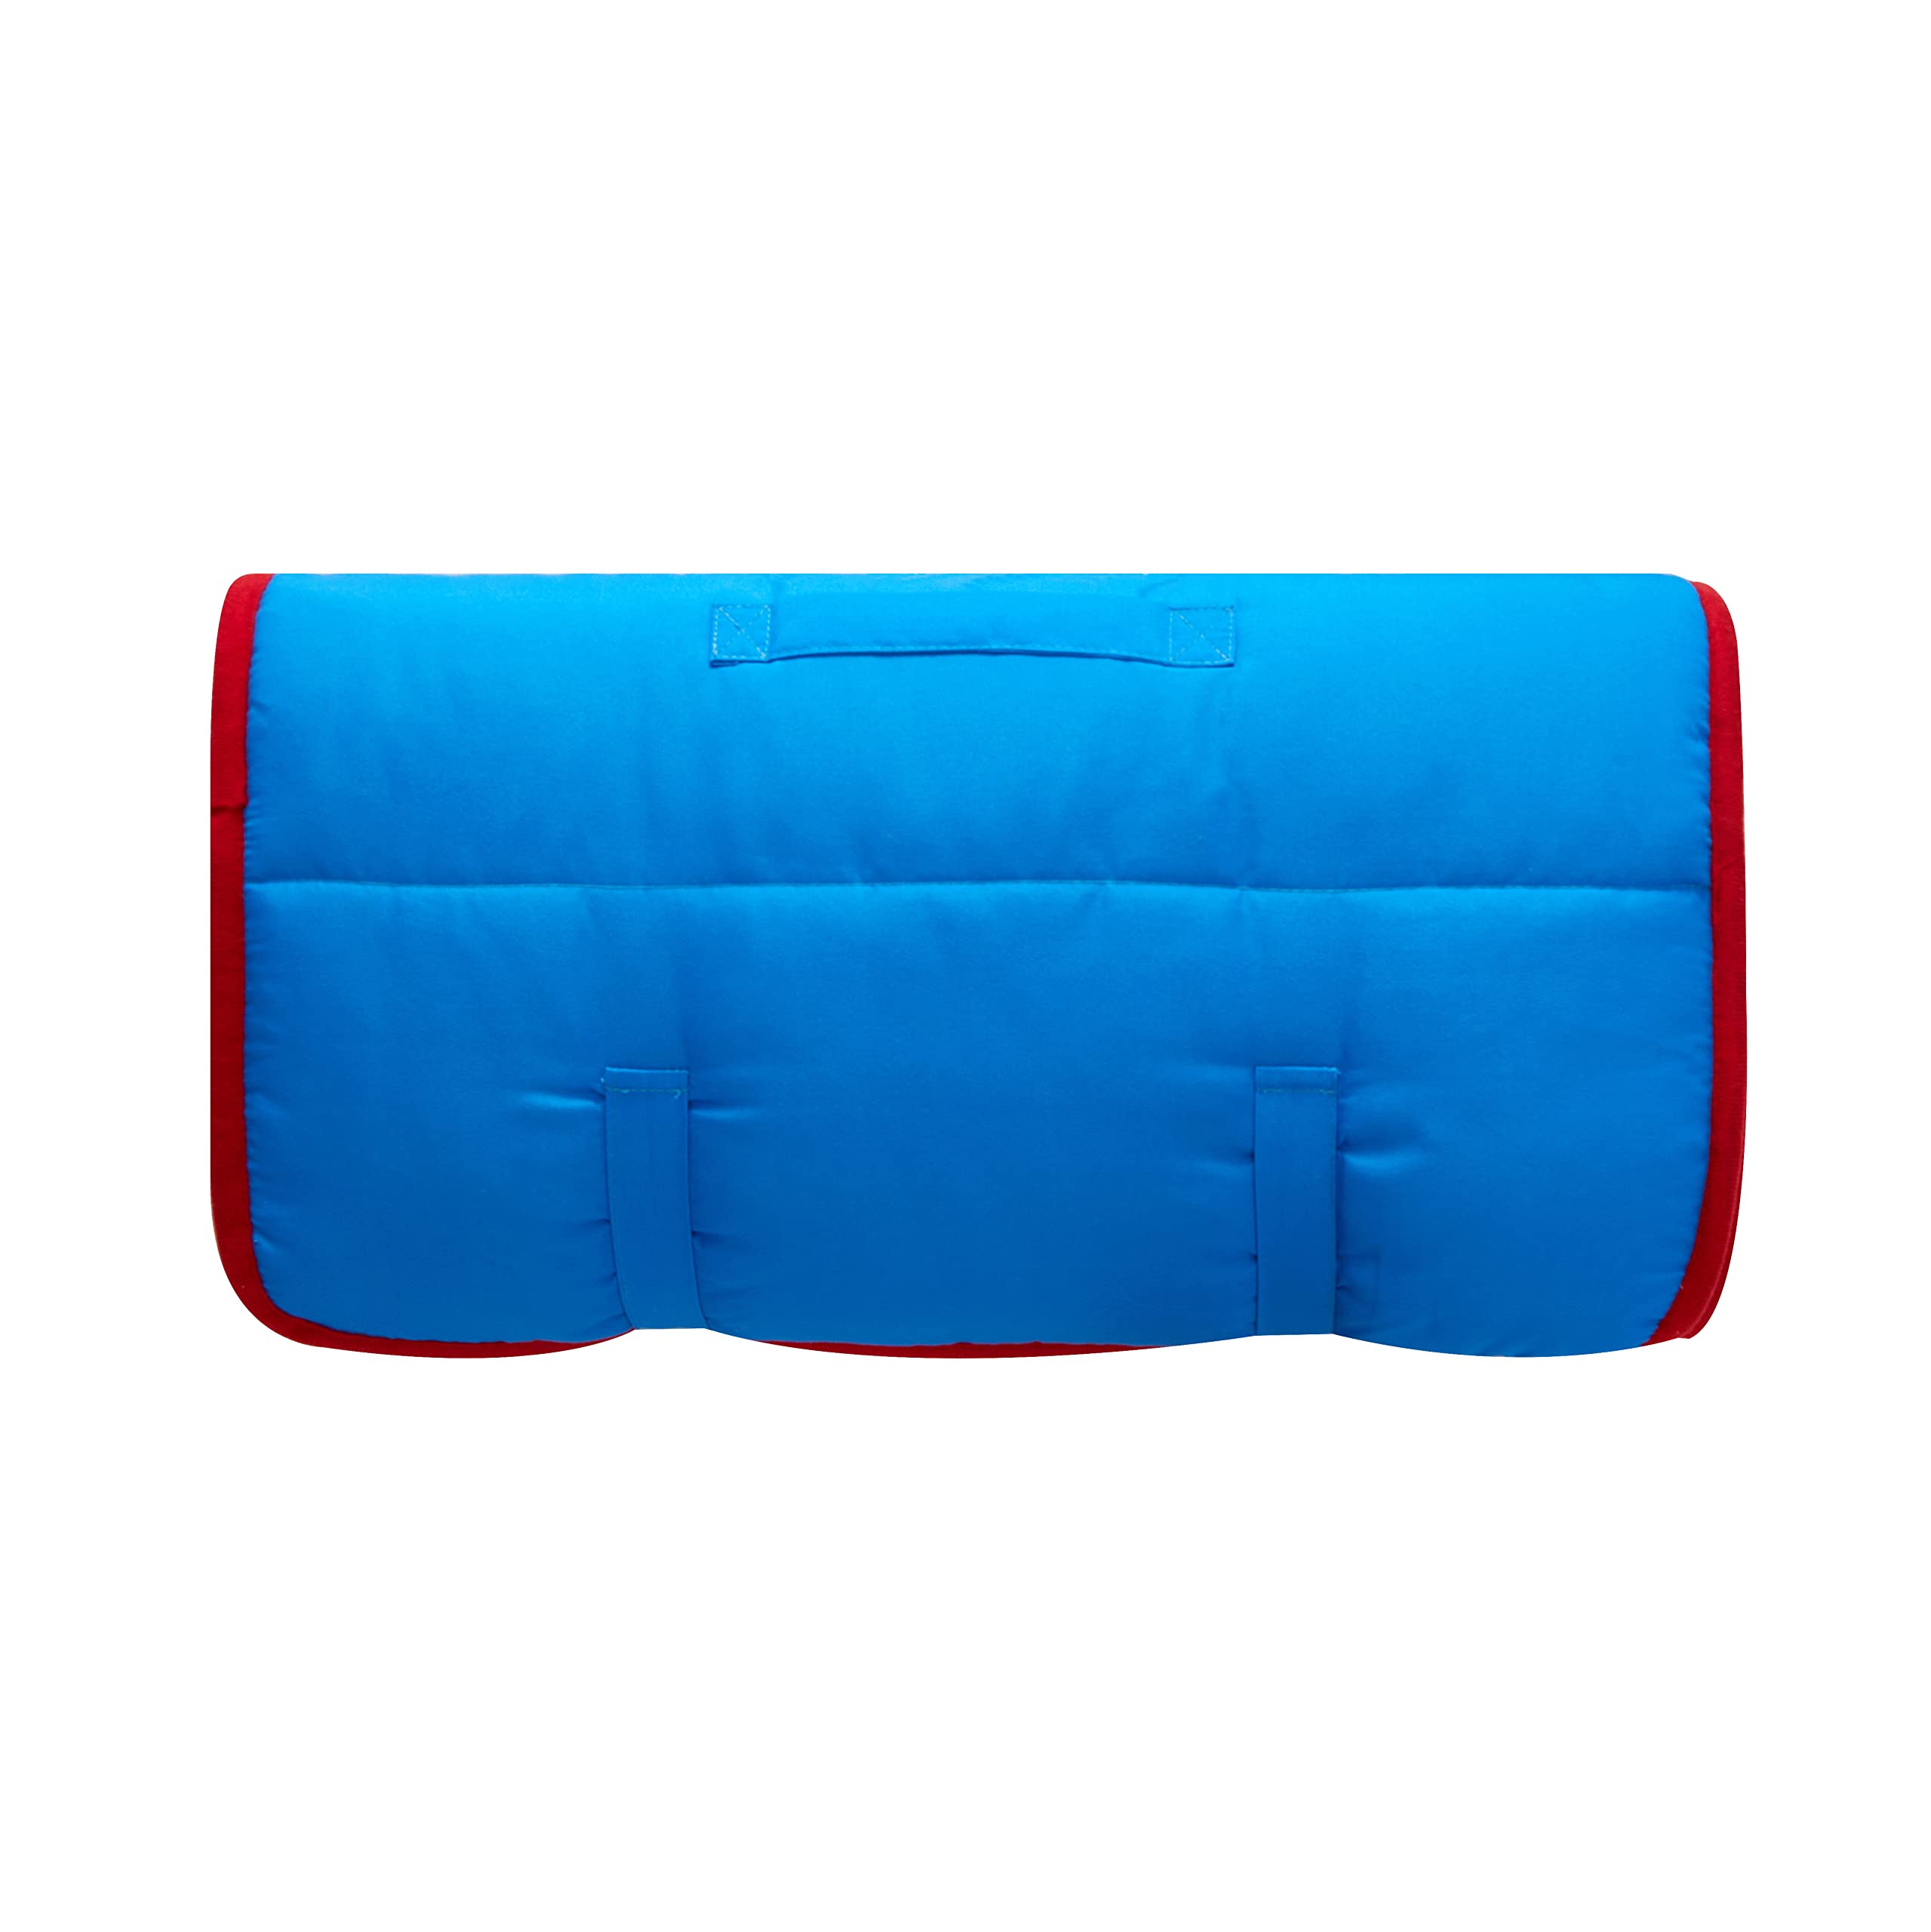 Super Soft Plush Toddler Quilted Nap Mat with Built in Blanket and Pillow